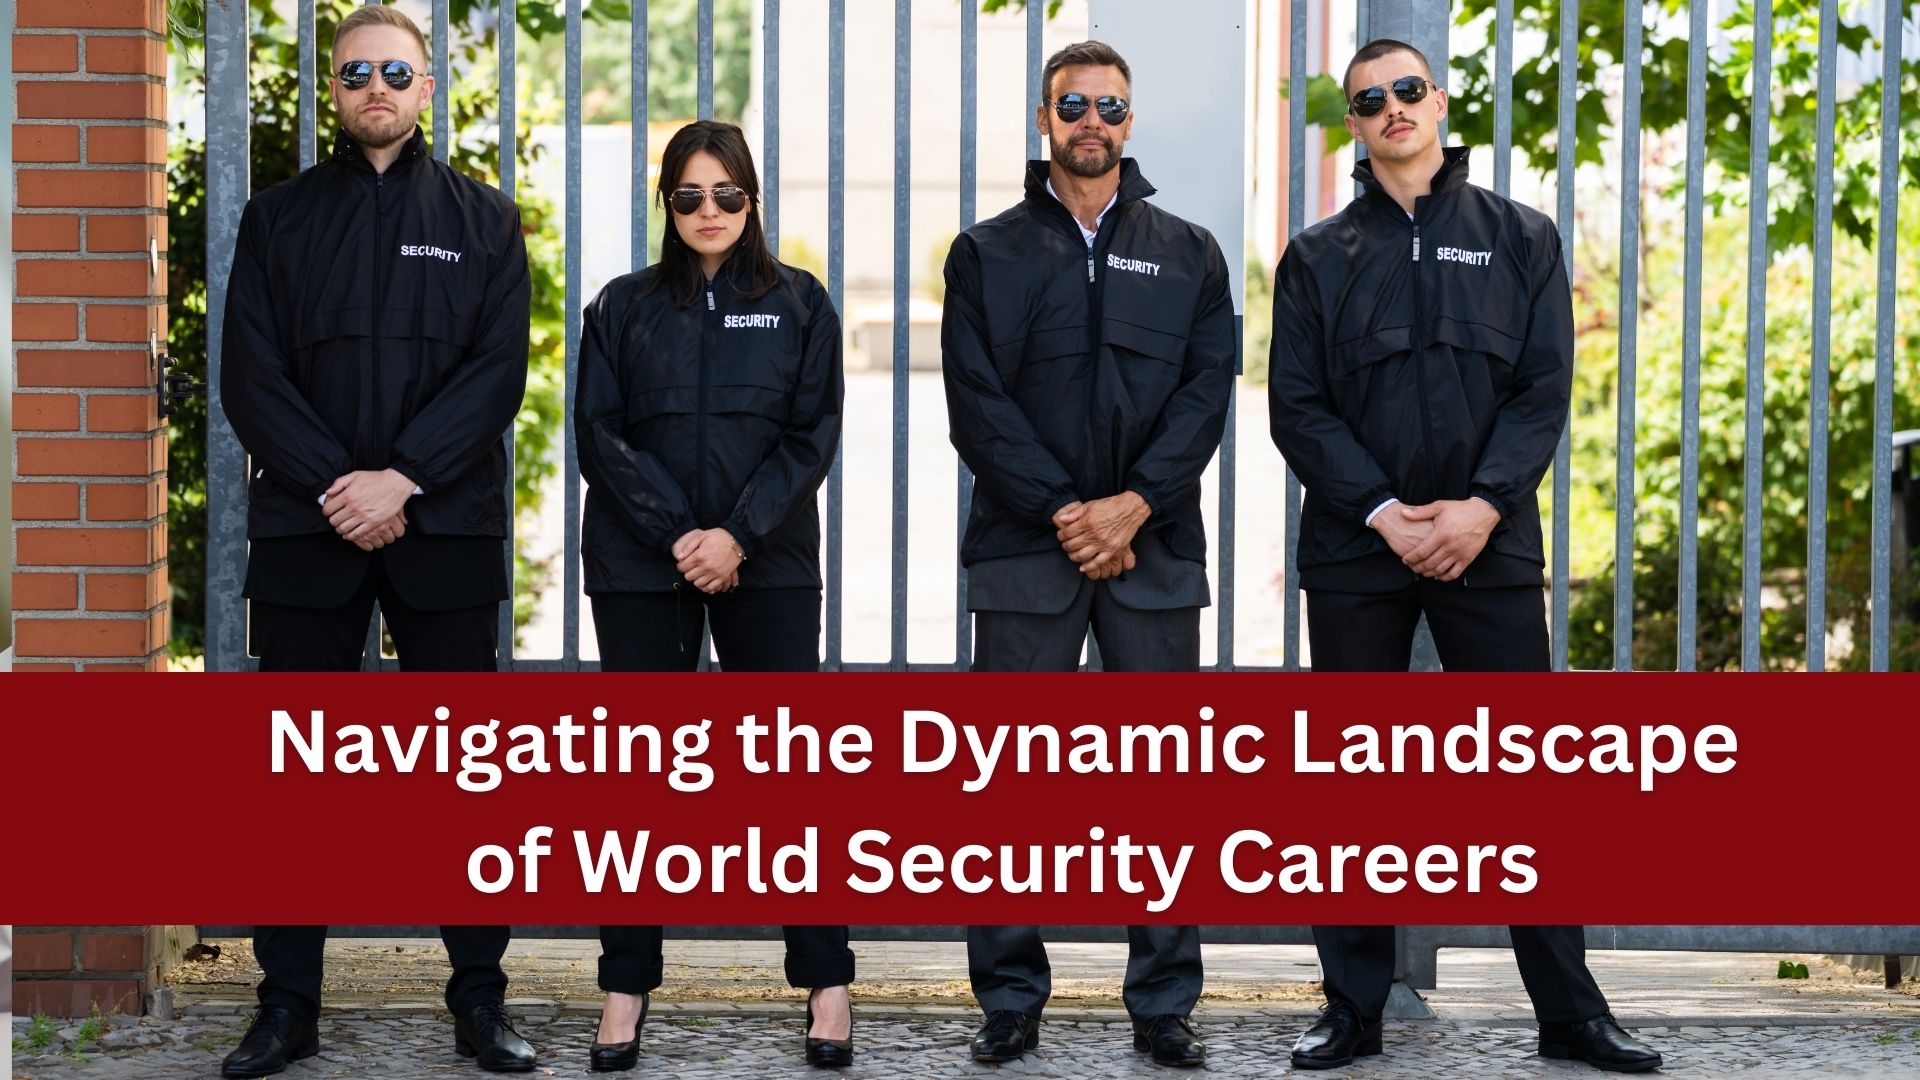 Navigating the Dynamic Landscape of World Security Careers